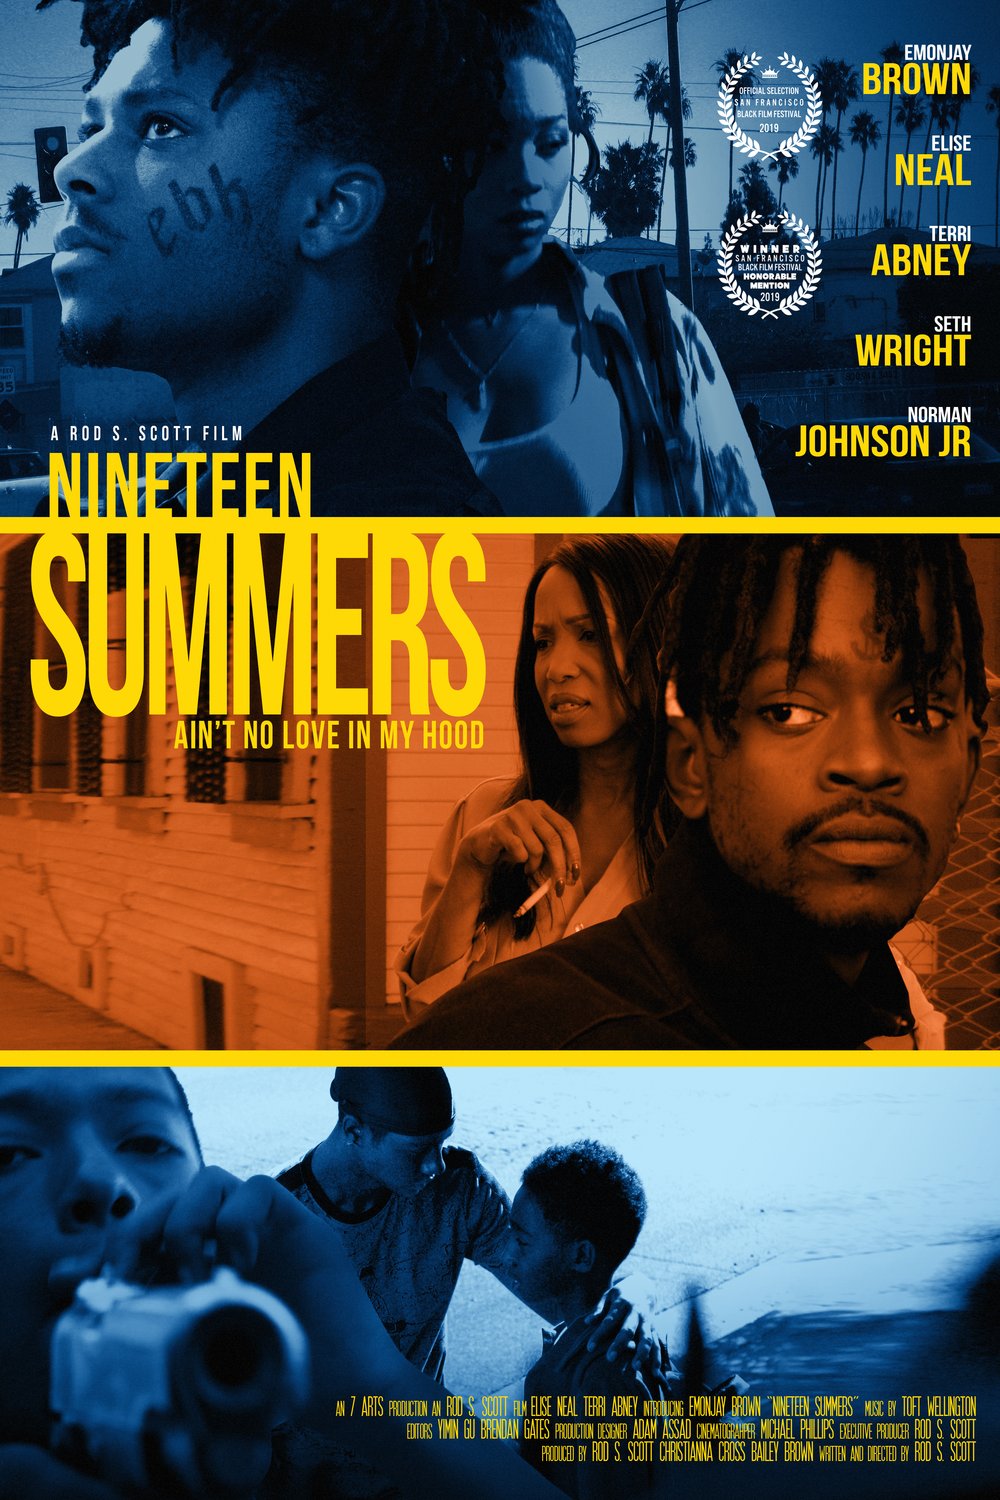 Poster of the movie Nineteen Summers